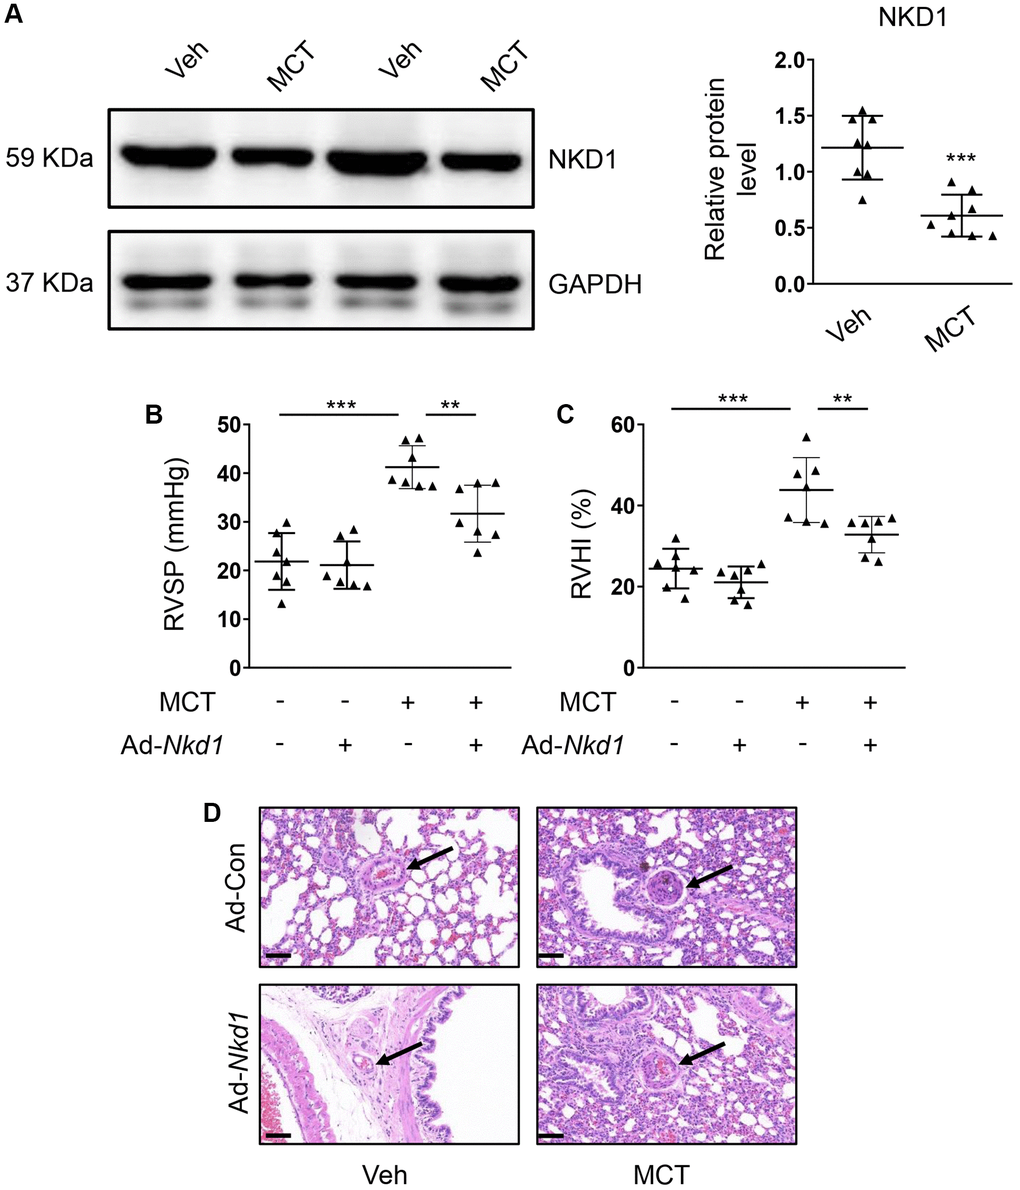 Upregulating NKD1 alleviates PAH symptoms in MCT-induced mouse PAH model. (A) The relative protein level of NKD1 in dissected PAs of MCT-treated mice was assessed by western blotting (post hoc for LSD test; n = 8 samples). RVSP (B) and RVHI (C) of MCT-treated mice were measured (post hoc for LSD test; n = 7 samples). RVSP indicates right ventricular systolic pressure. RVHI indicates right ventricular hypertrophy index. (D) Representative H-E staining pictures of lung tissues in vehicle- or MCT-treated mice after transfection of Ad-Con or Ad-Nkd1 were shown. The black arrows indicate peripheral PAs of lung tissues. Bar = 50 μm. Data were shown as mean ± S.D. **P ***P 